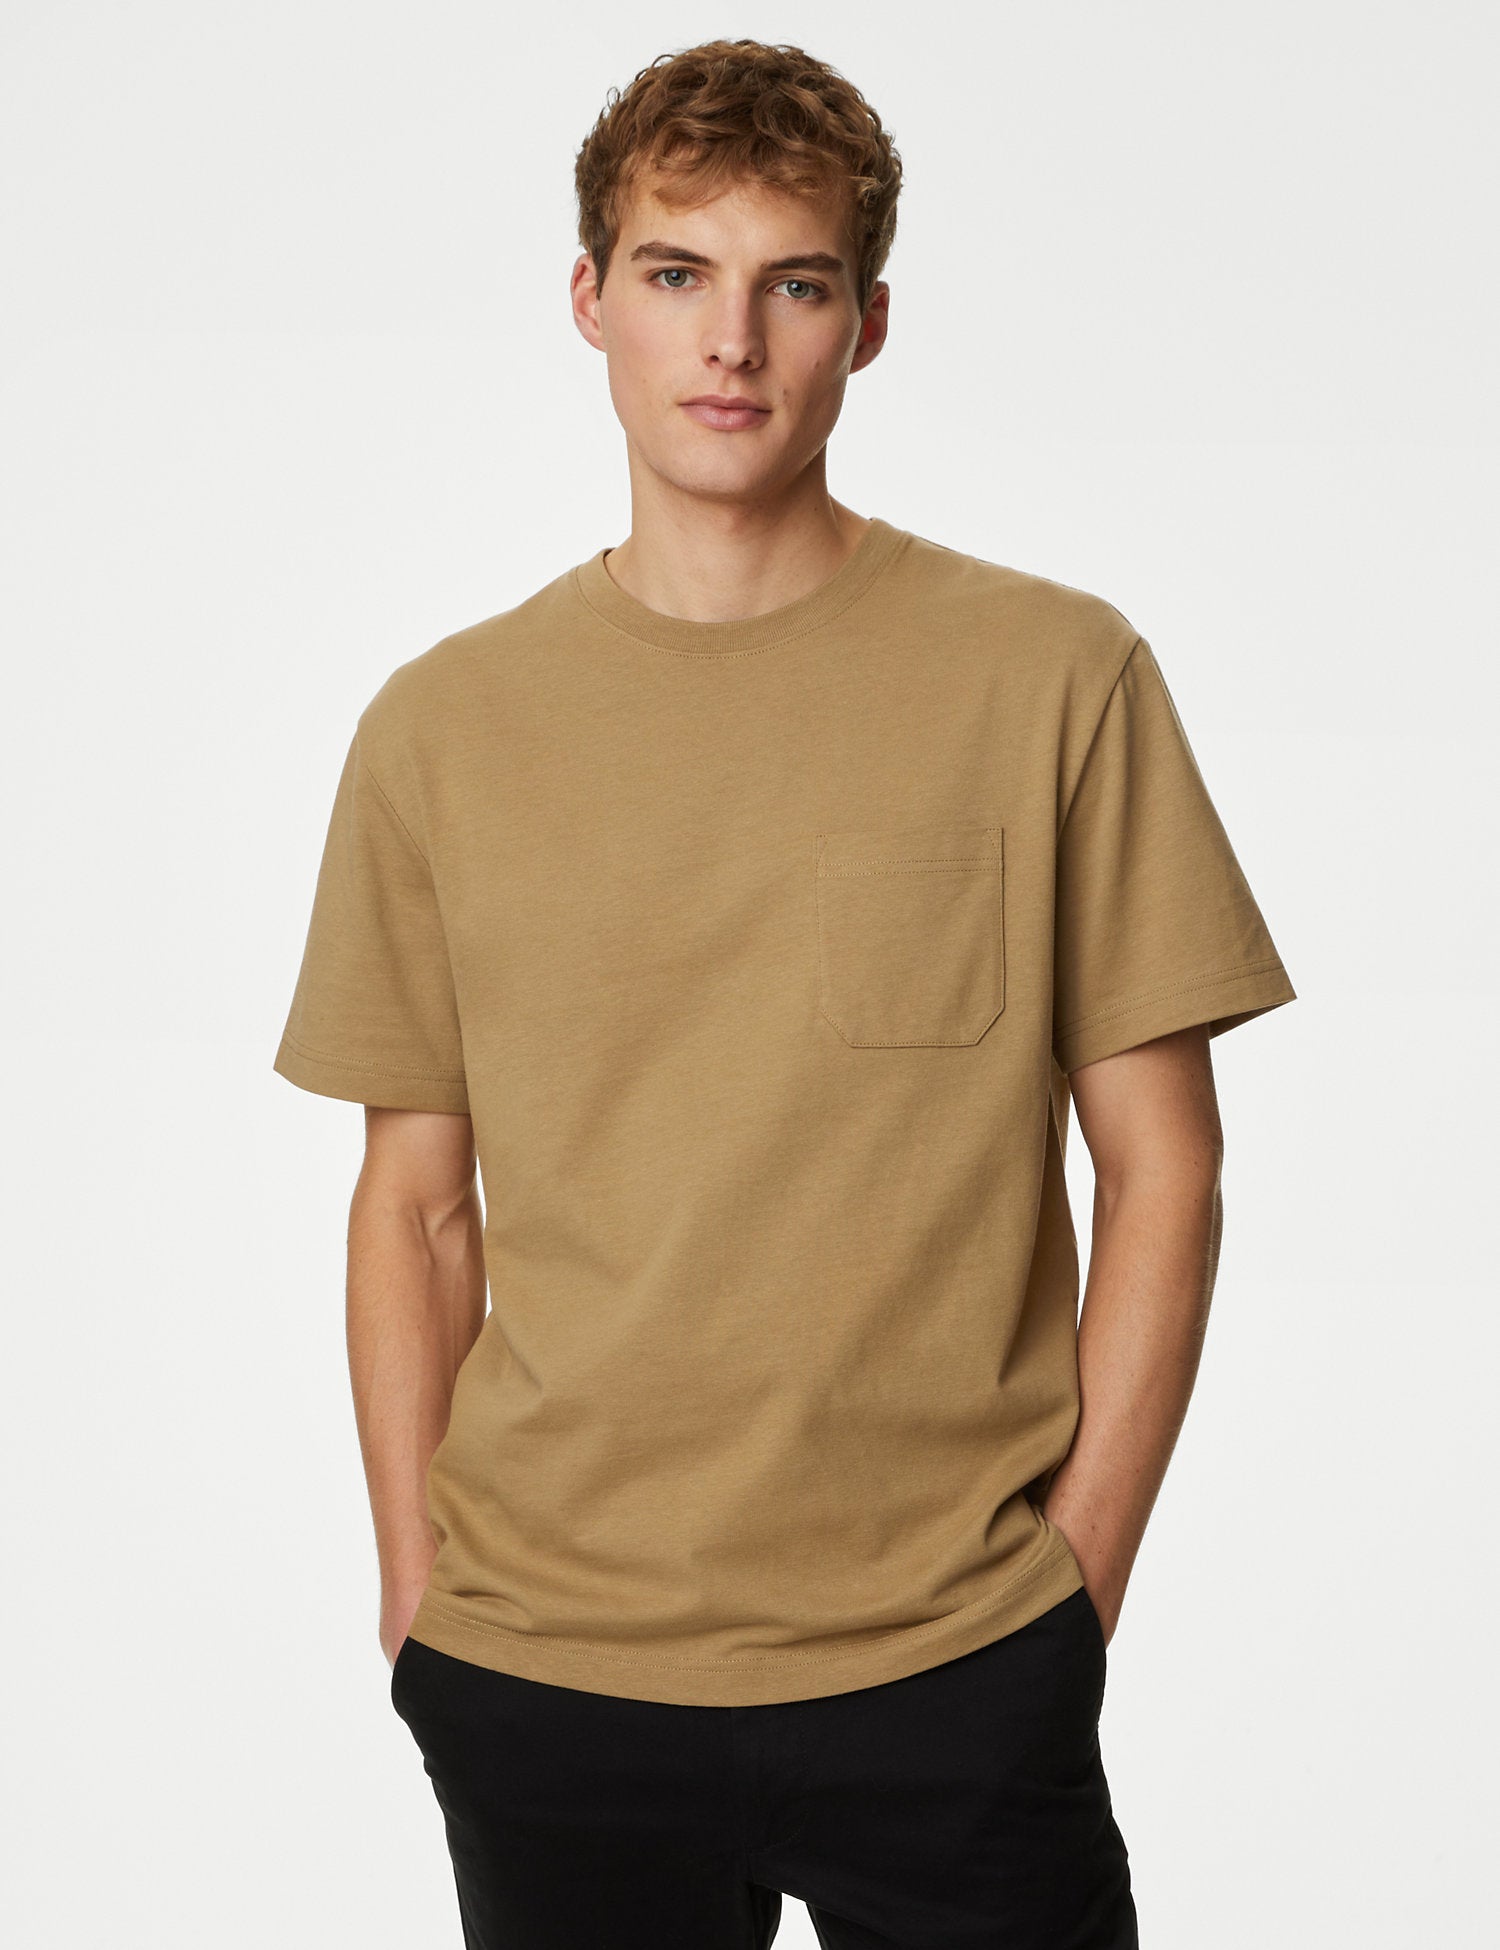 Pure Cotton Heavy Weight T-Shirt Marks & Spencer Philippines, t-shirt